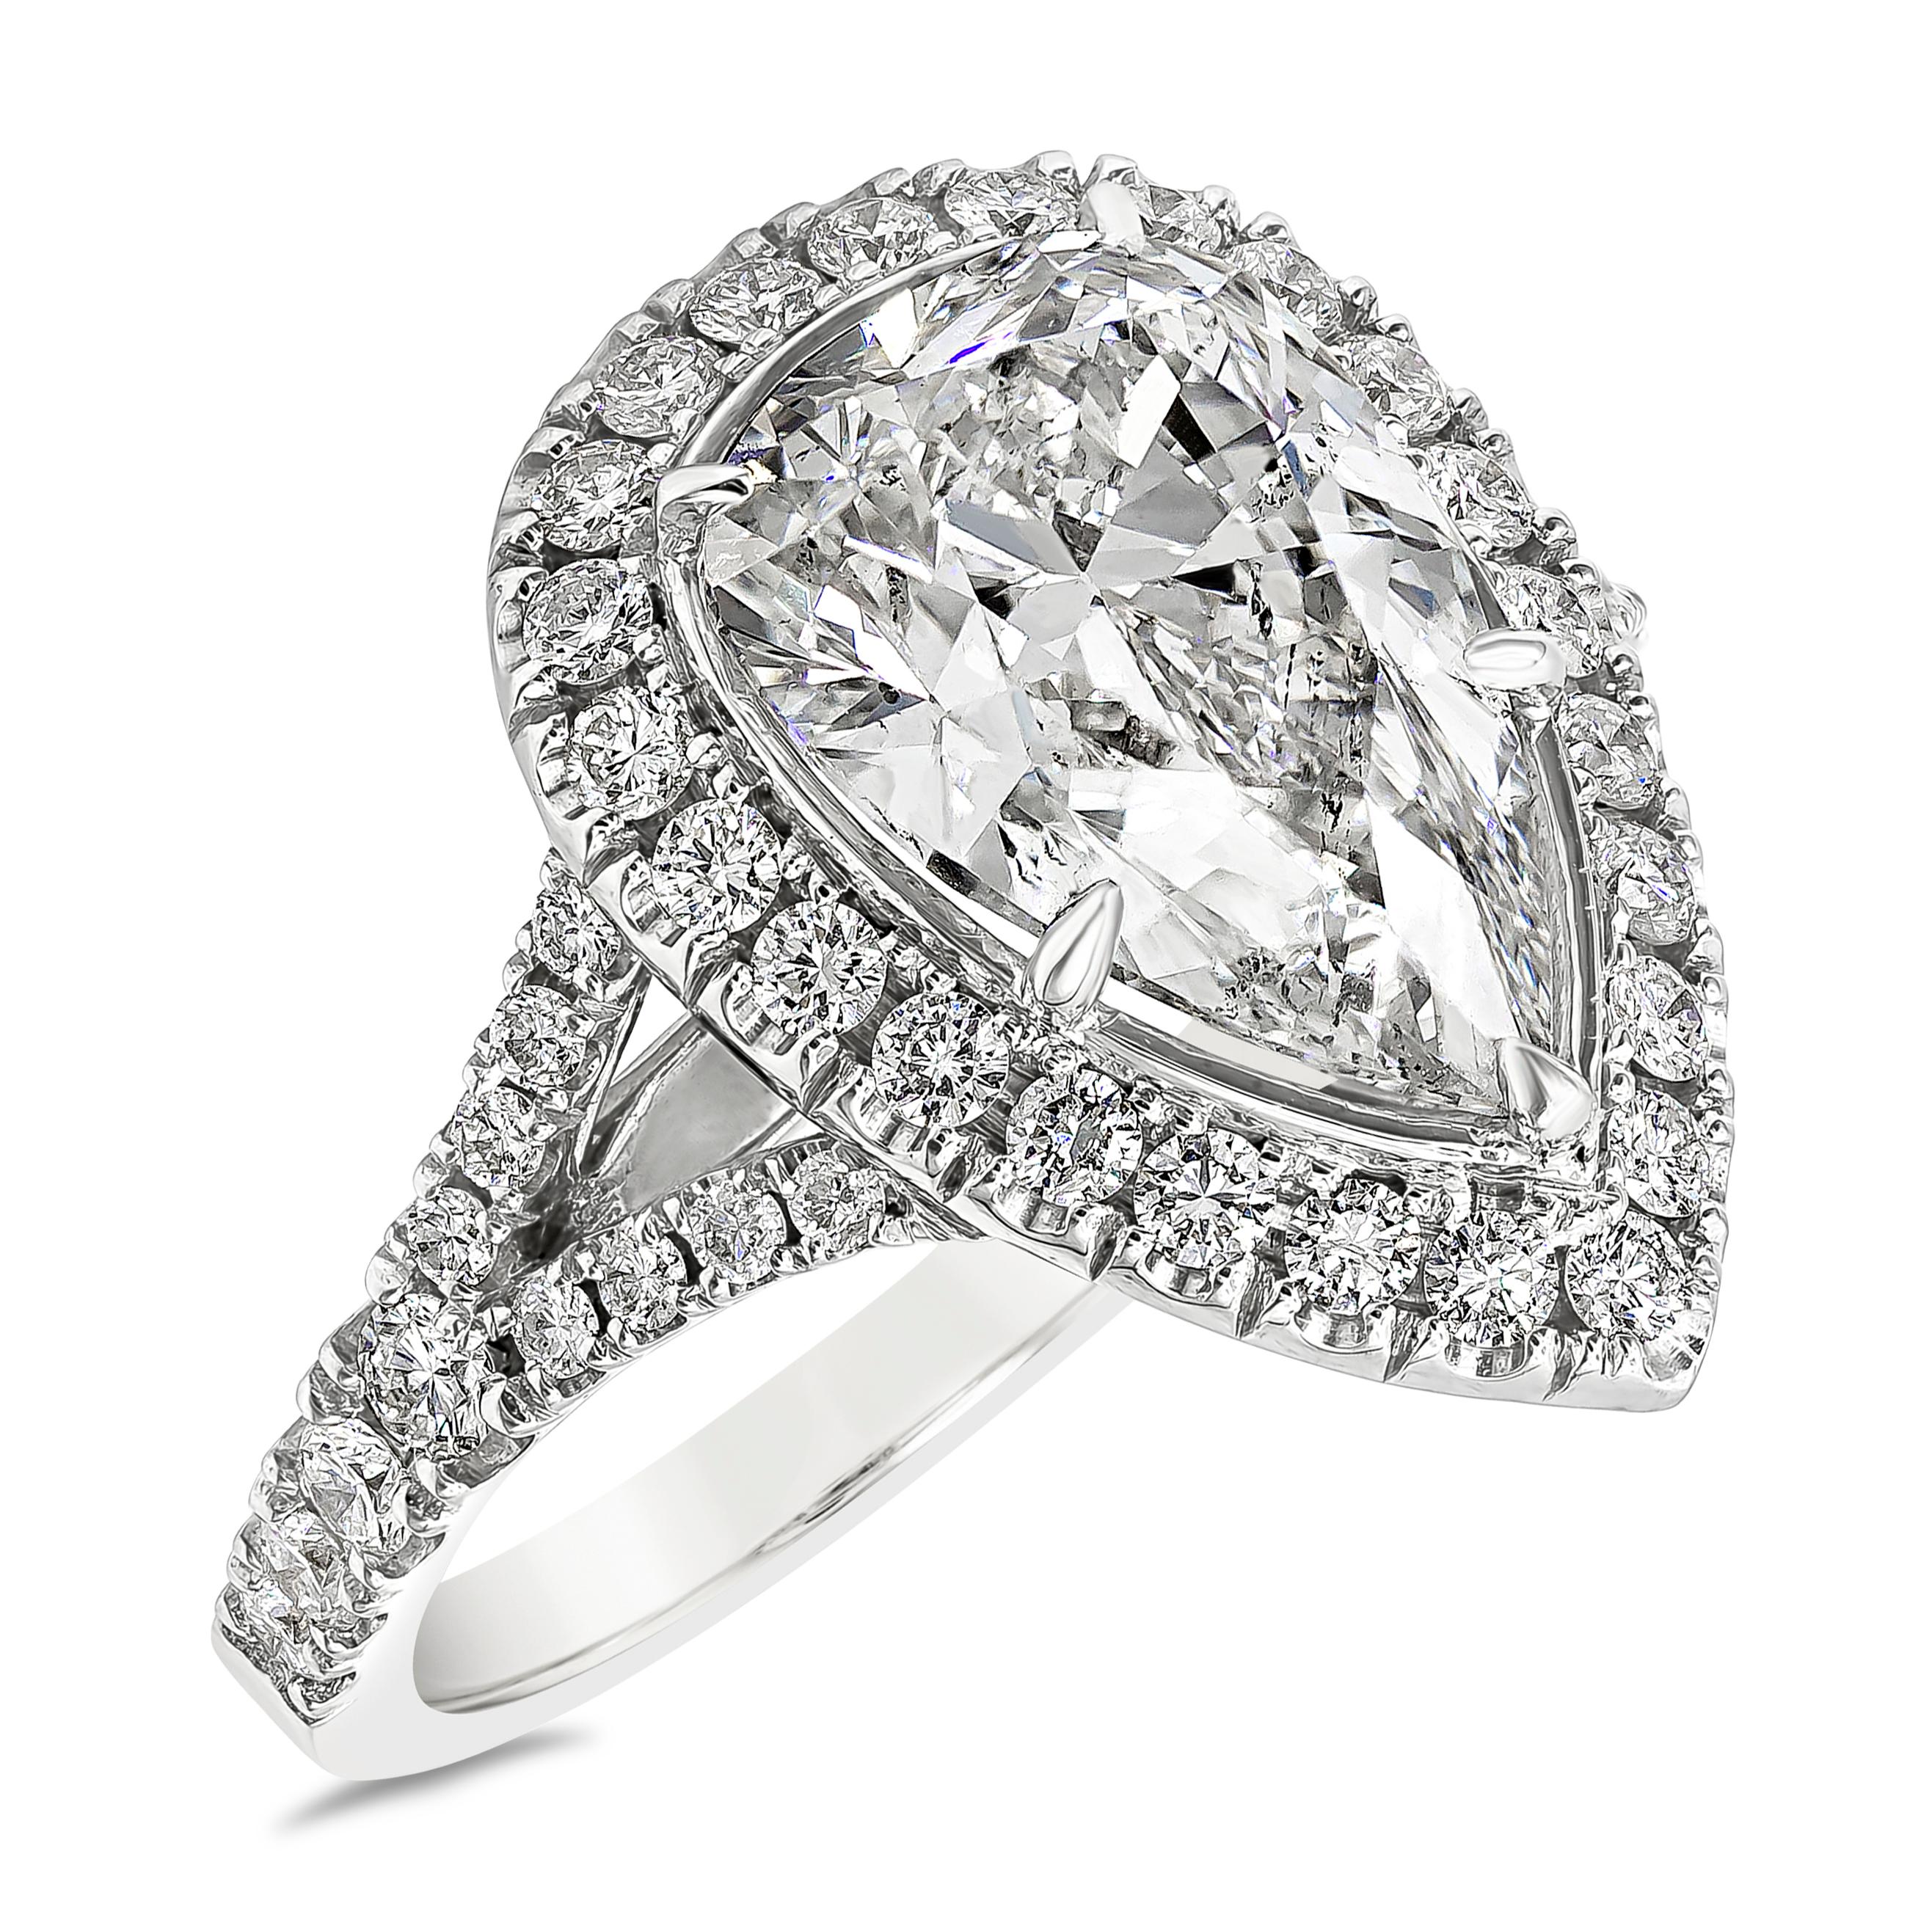 A contemporary take to the traditional halo style. Showcasing a 4.03 carat pear shape diamond certified by GIA as H color, SI2 in clarity. Center diamond is surrounded by a single row of round brilliant diamonds, set in a diamond encrusted